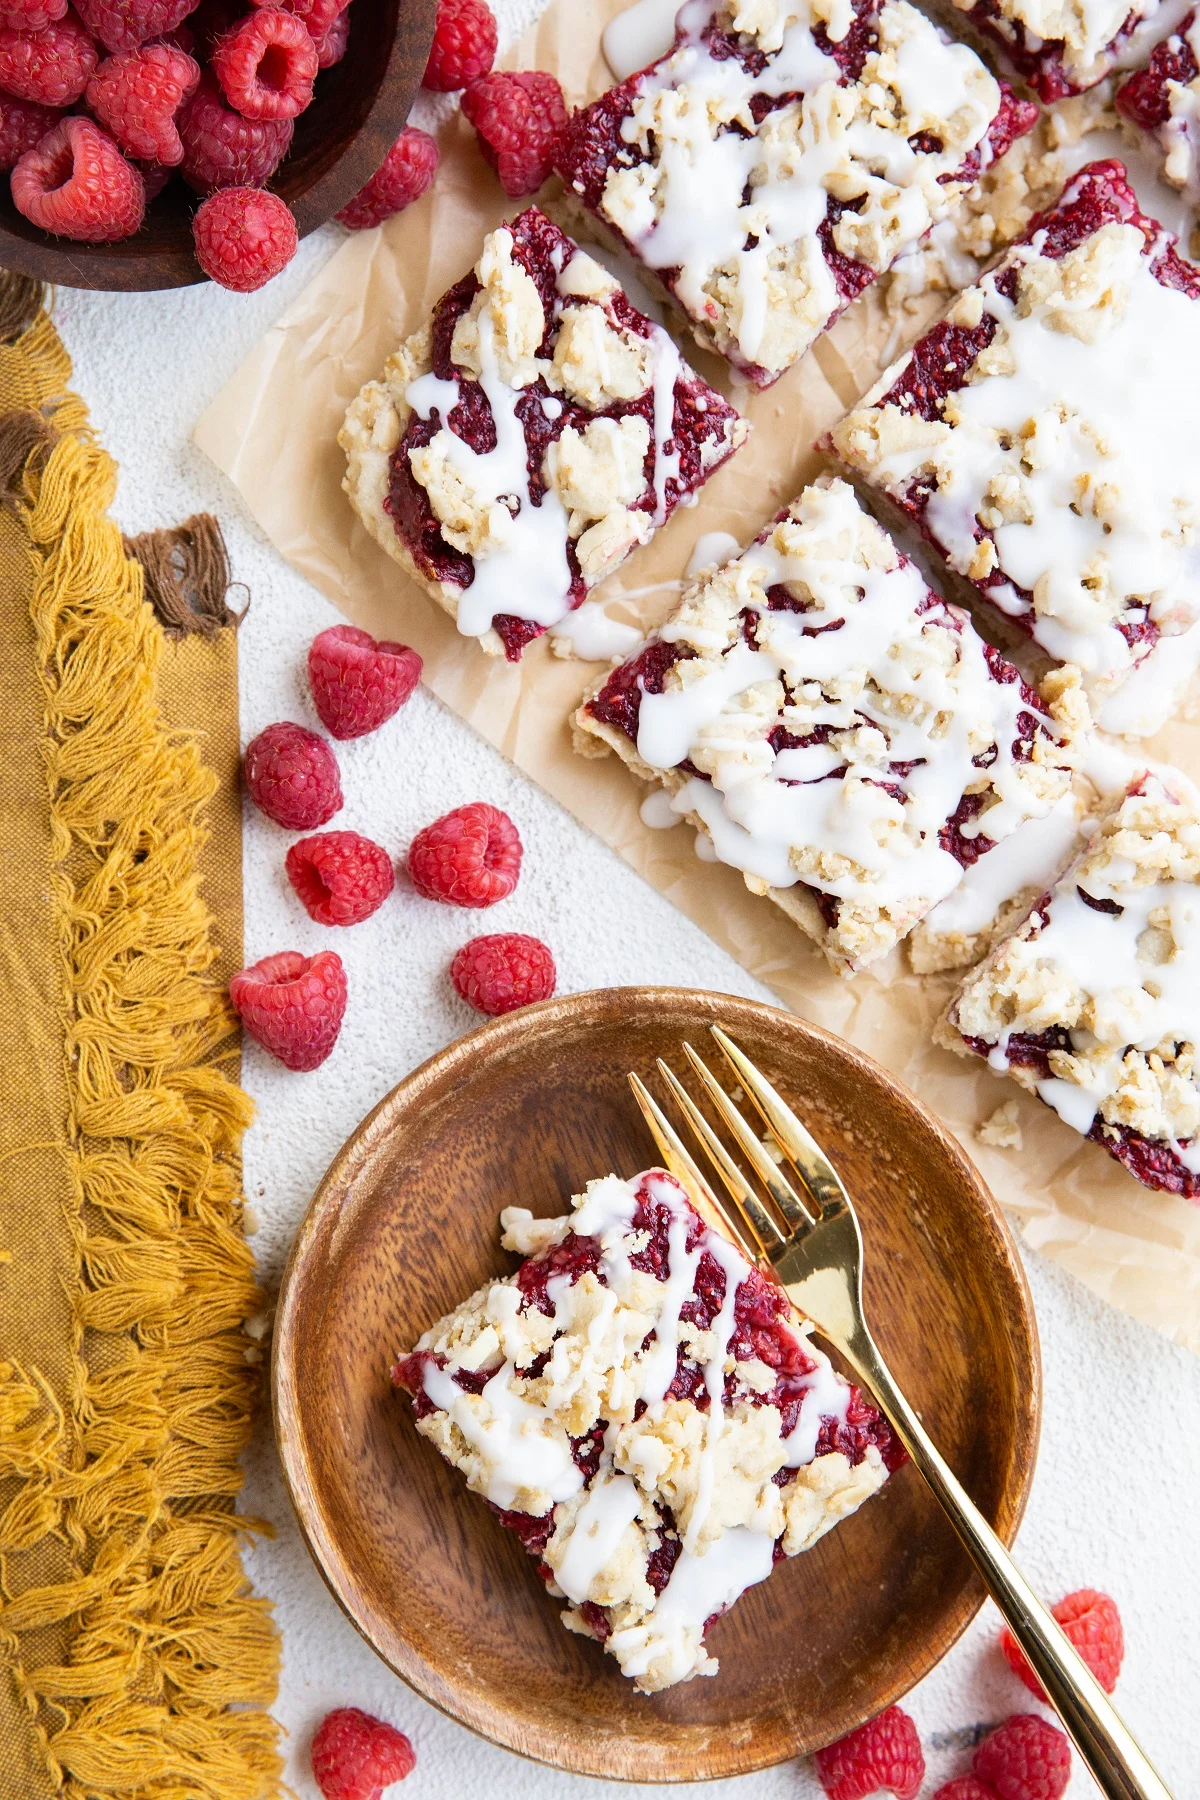 Parchment paper with slices of raspberry crumb bars and a wooden plate with a crumb bar. Fresh raspberries around the sides and a golden napkin.